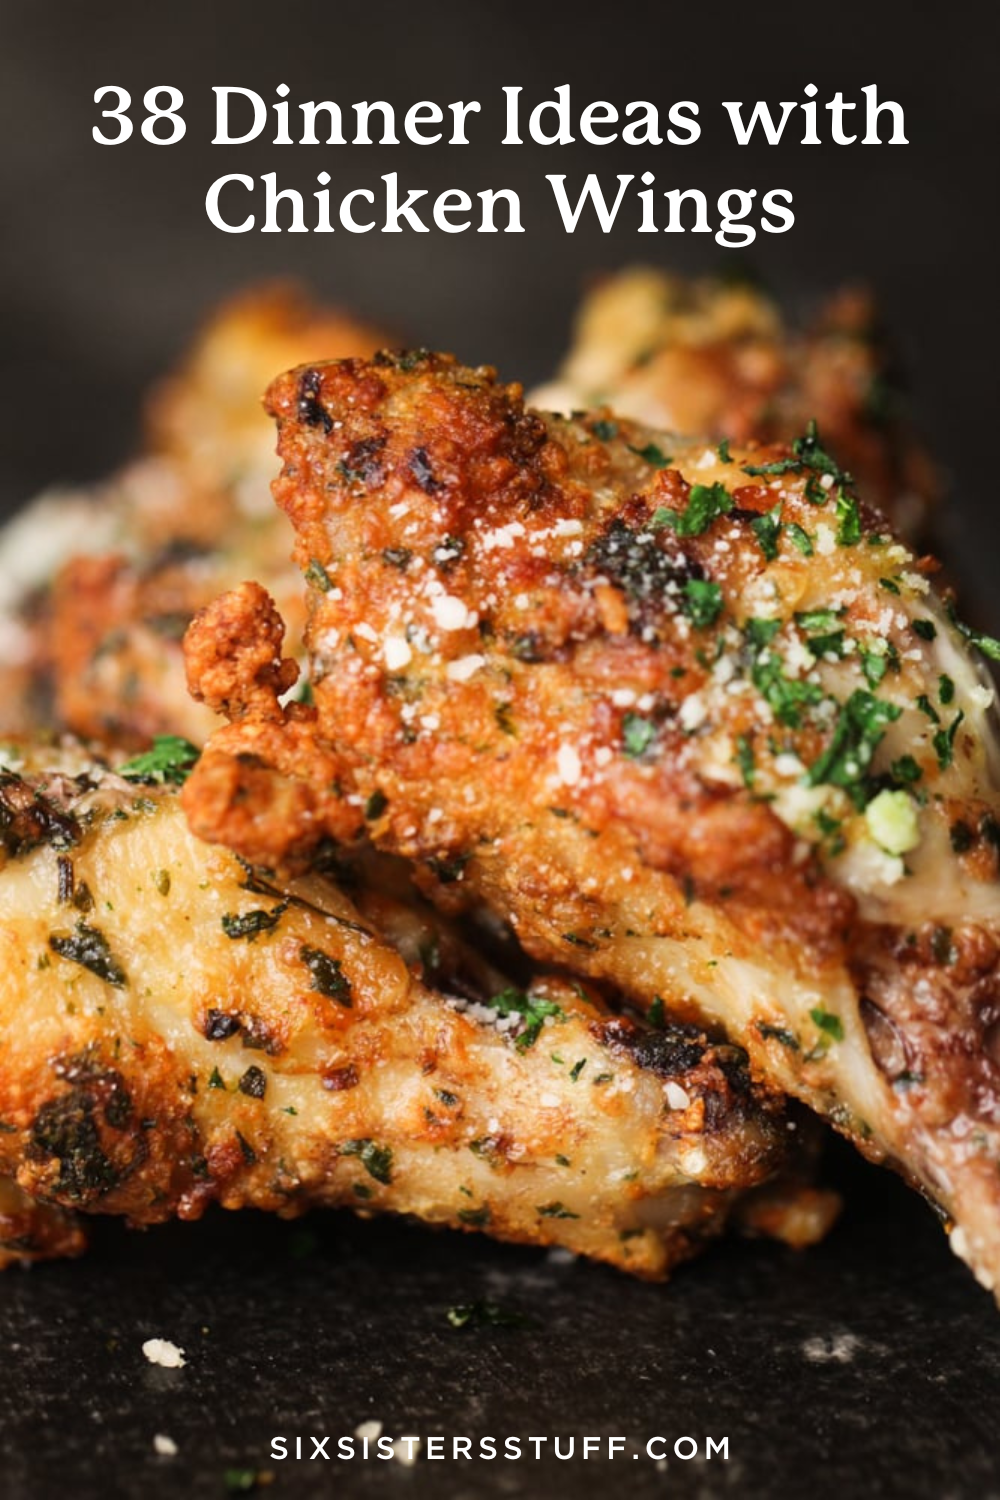 38 Dinner Ideas with Chicken Wings